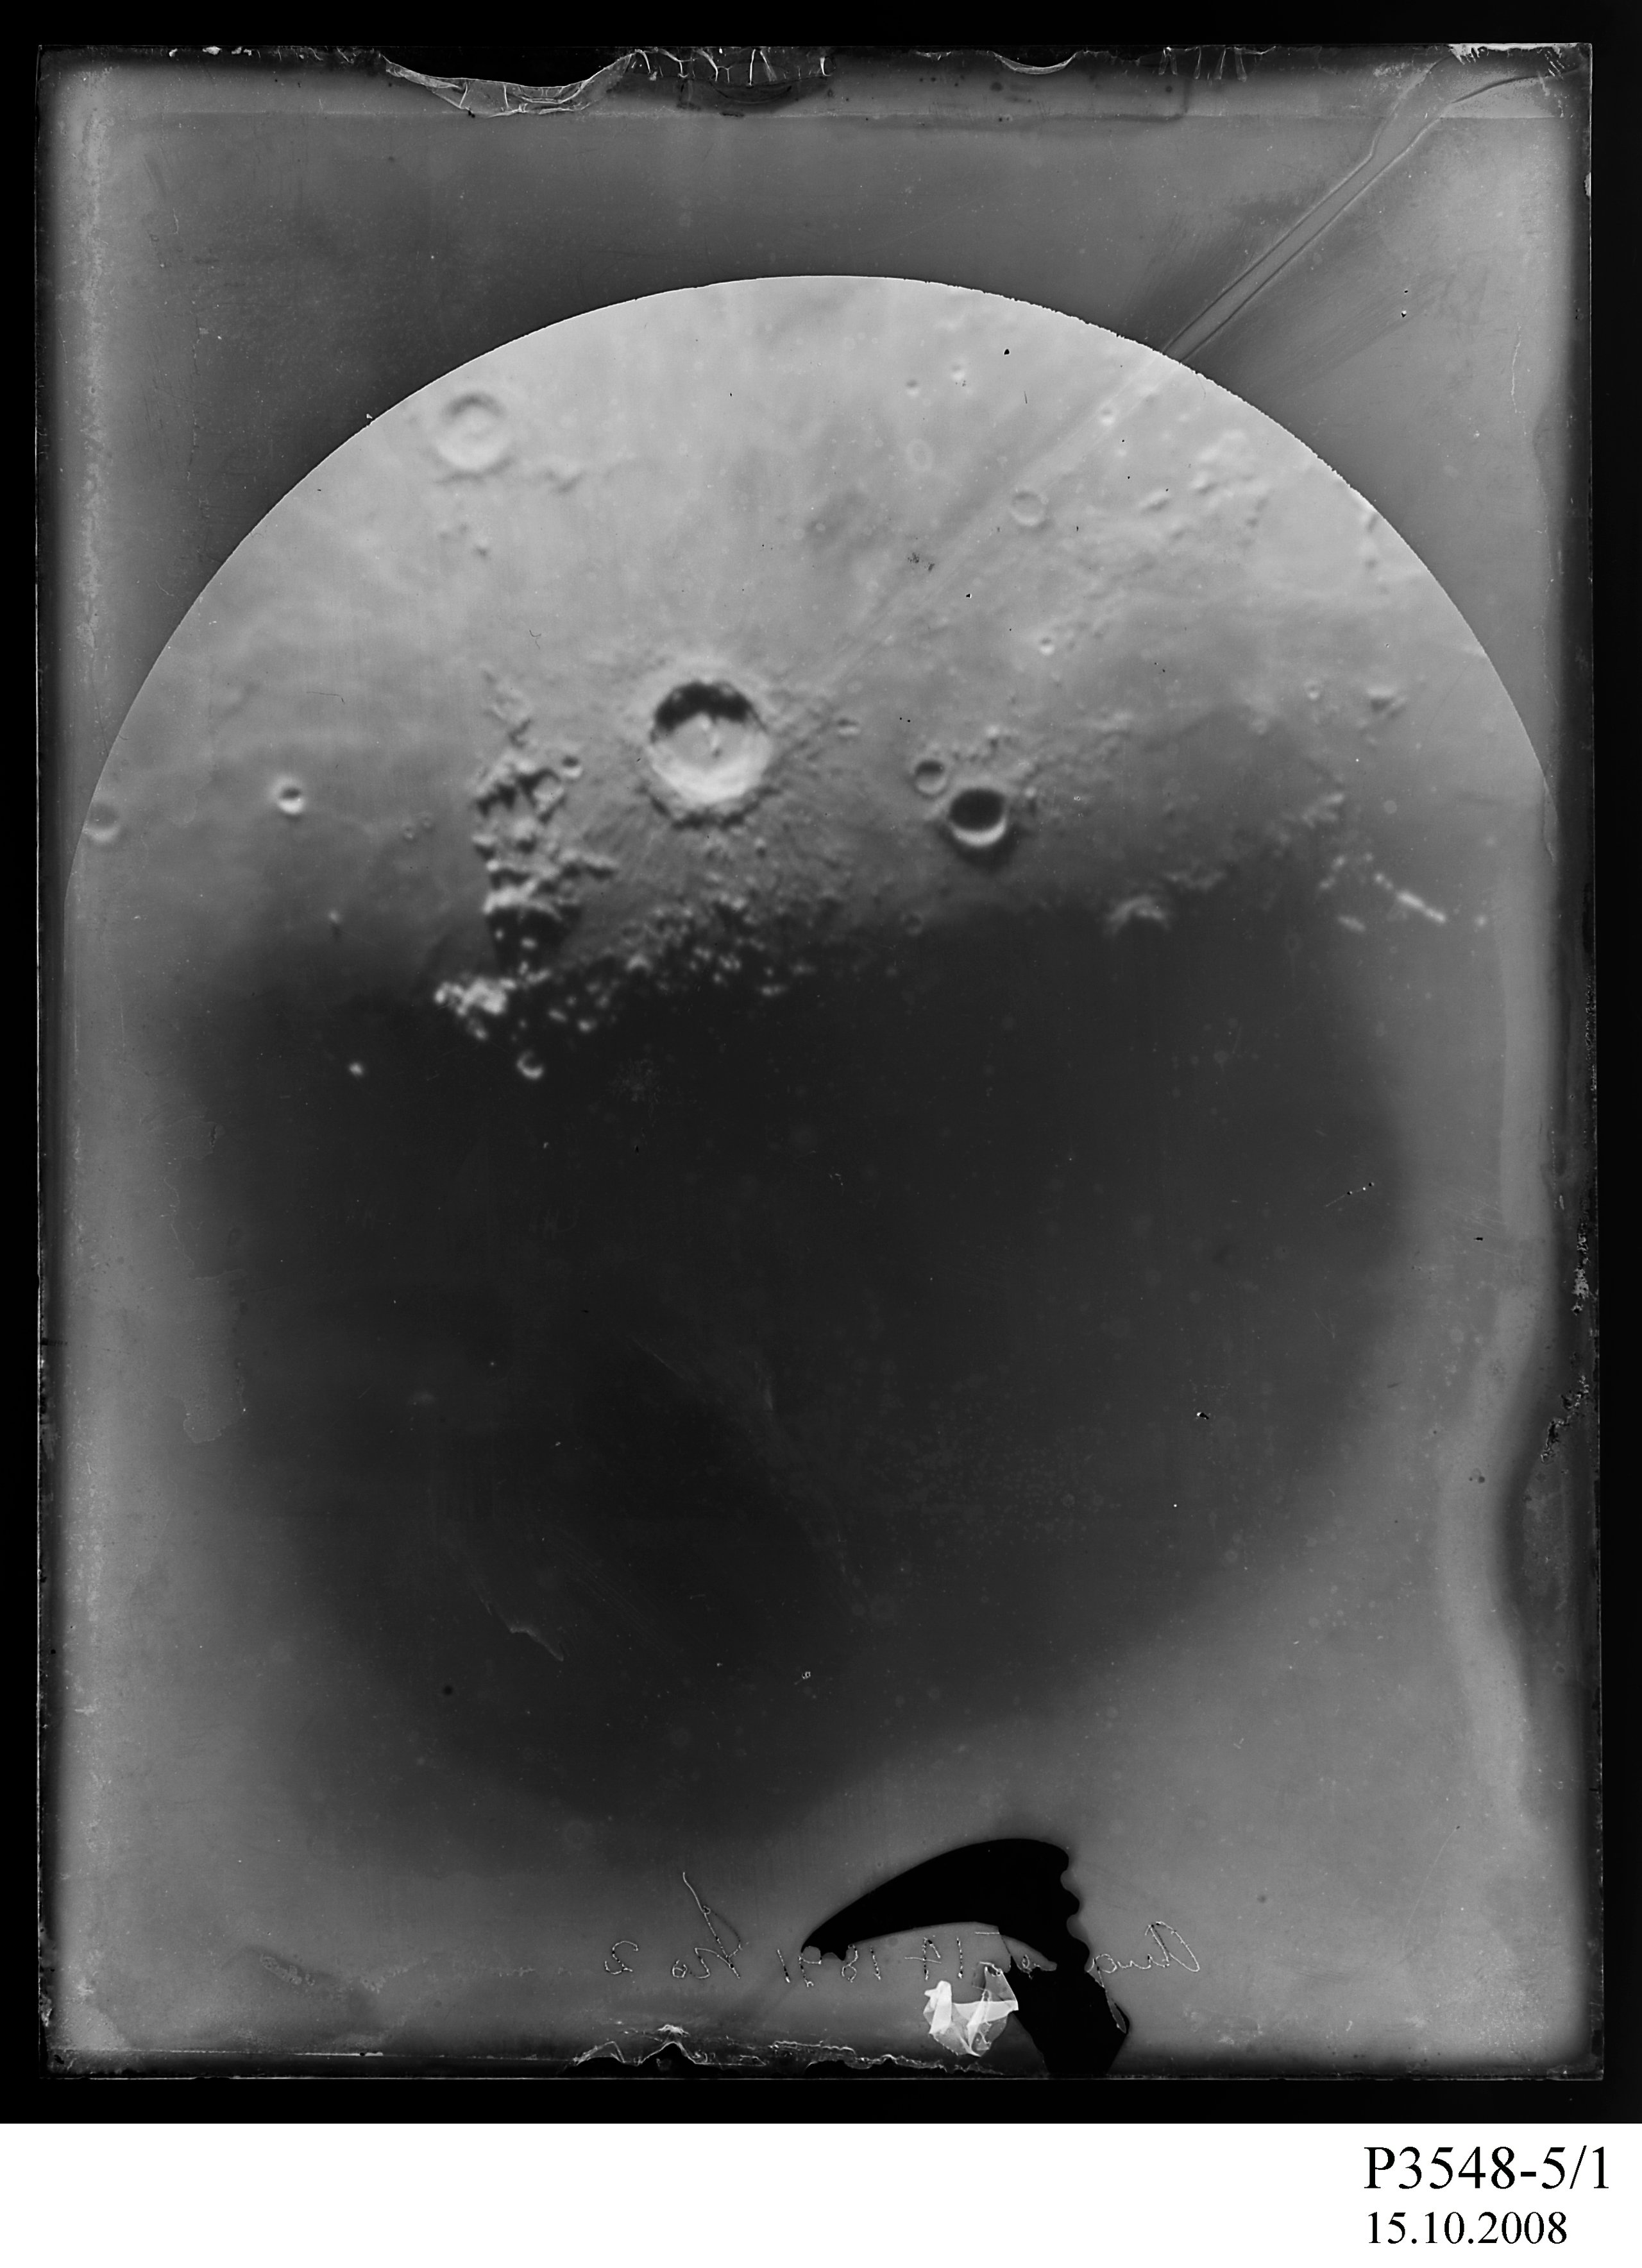 Moon showing the area of Copernicus 1891